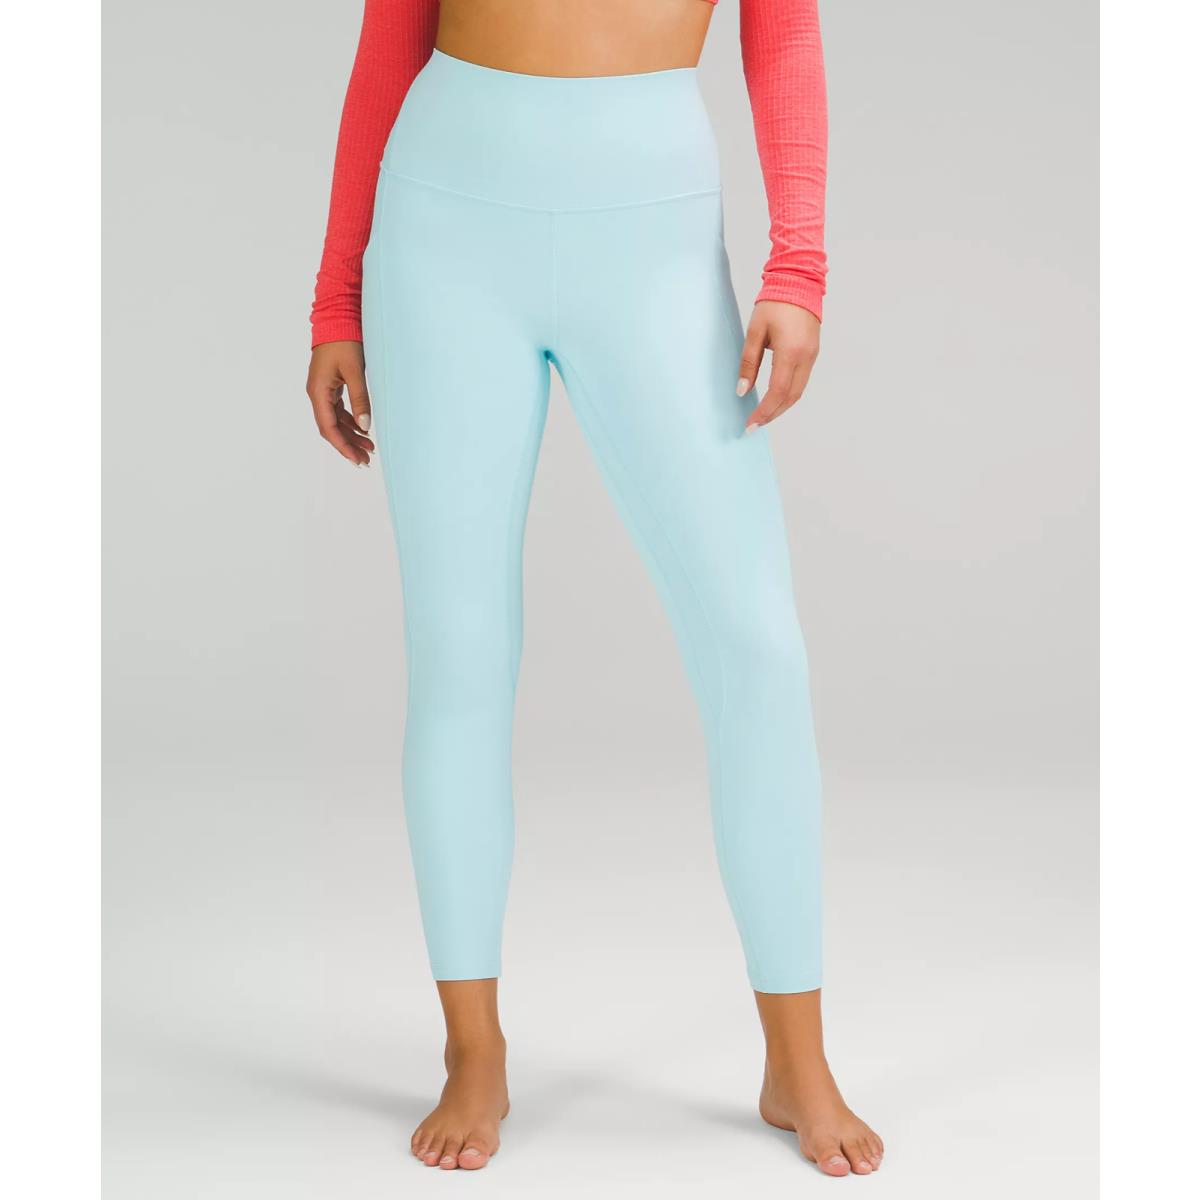 Lululemon Align HR Pant 25 with Pockets - Retail Icing Blue